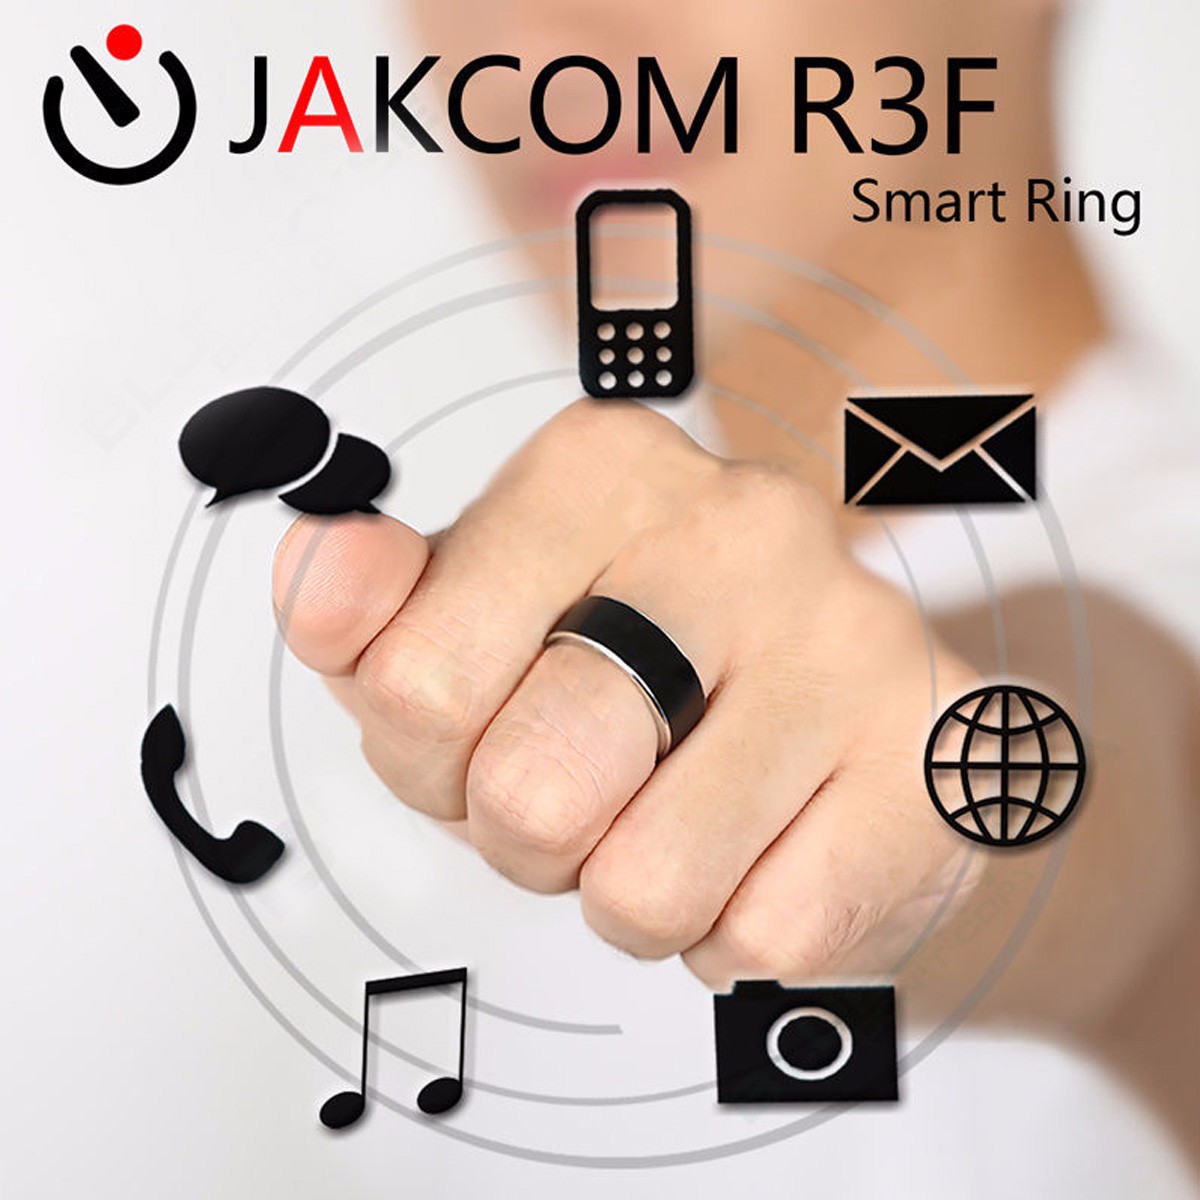 R3F Smart Ring for high-Speed NFC Electronic Bracelet Smart Phone Smart Accessories 3 Anti-app Enable Wearable Technology Magic Ring,Black,No.7